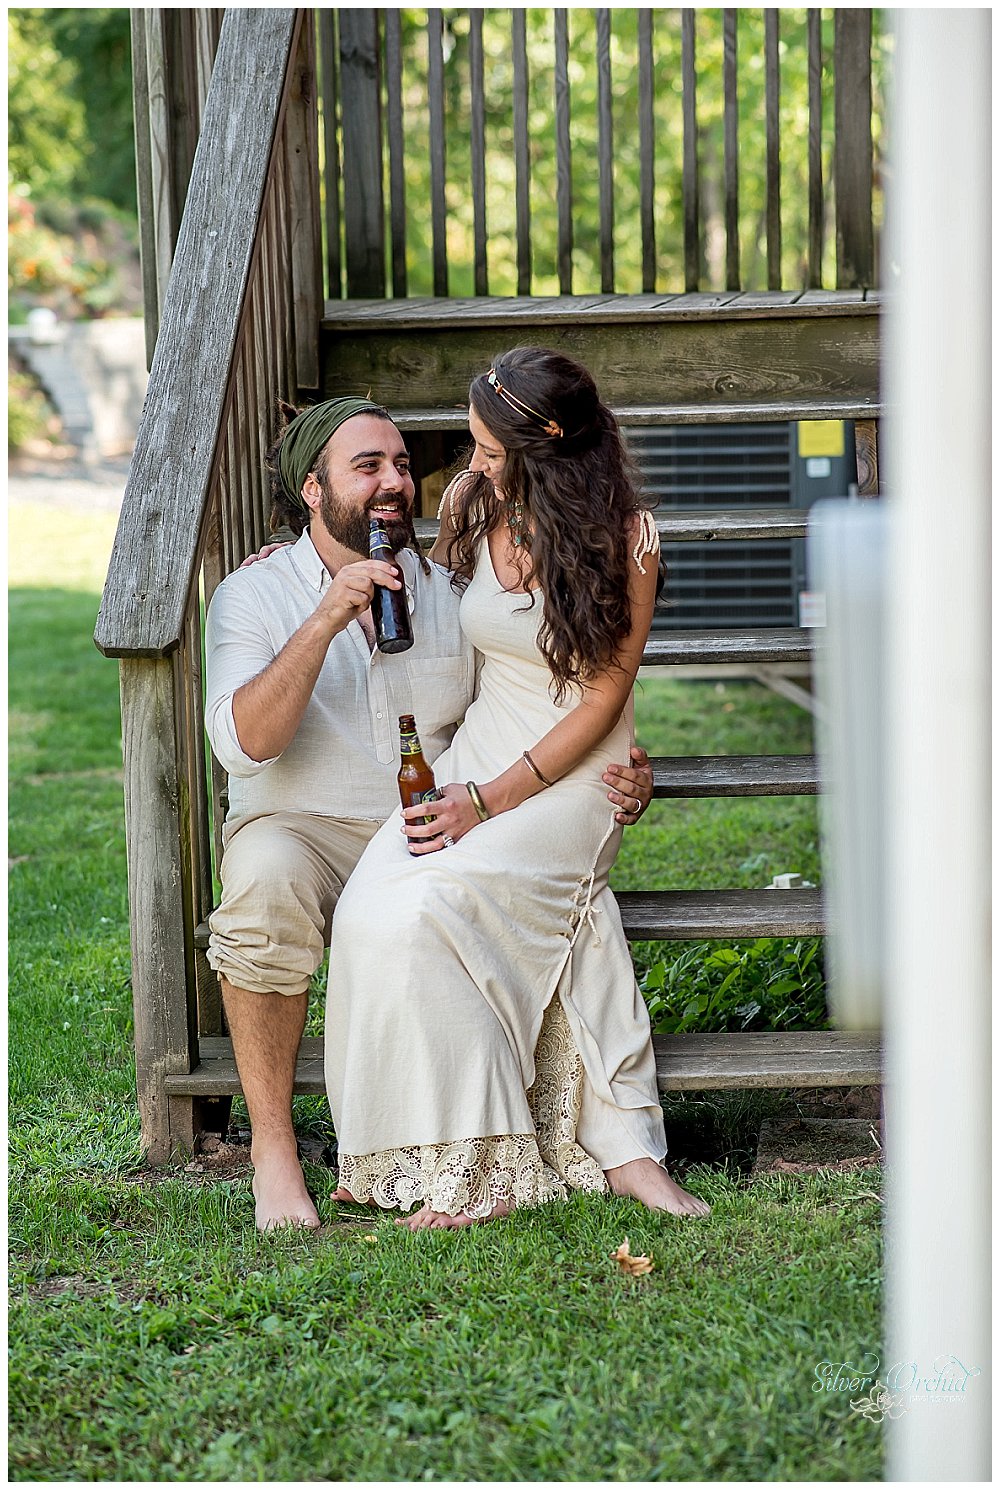 ©Silver Orchid Photography_wedding photography_Candids2015_silverorchidphotography.com_0007.jpg